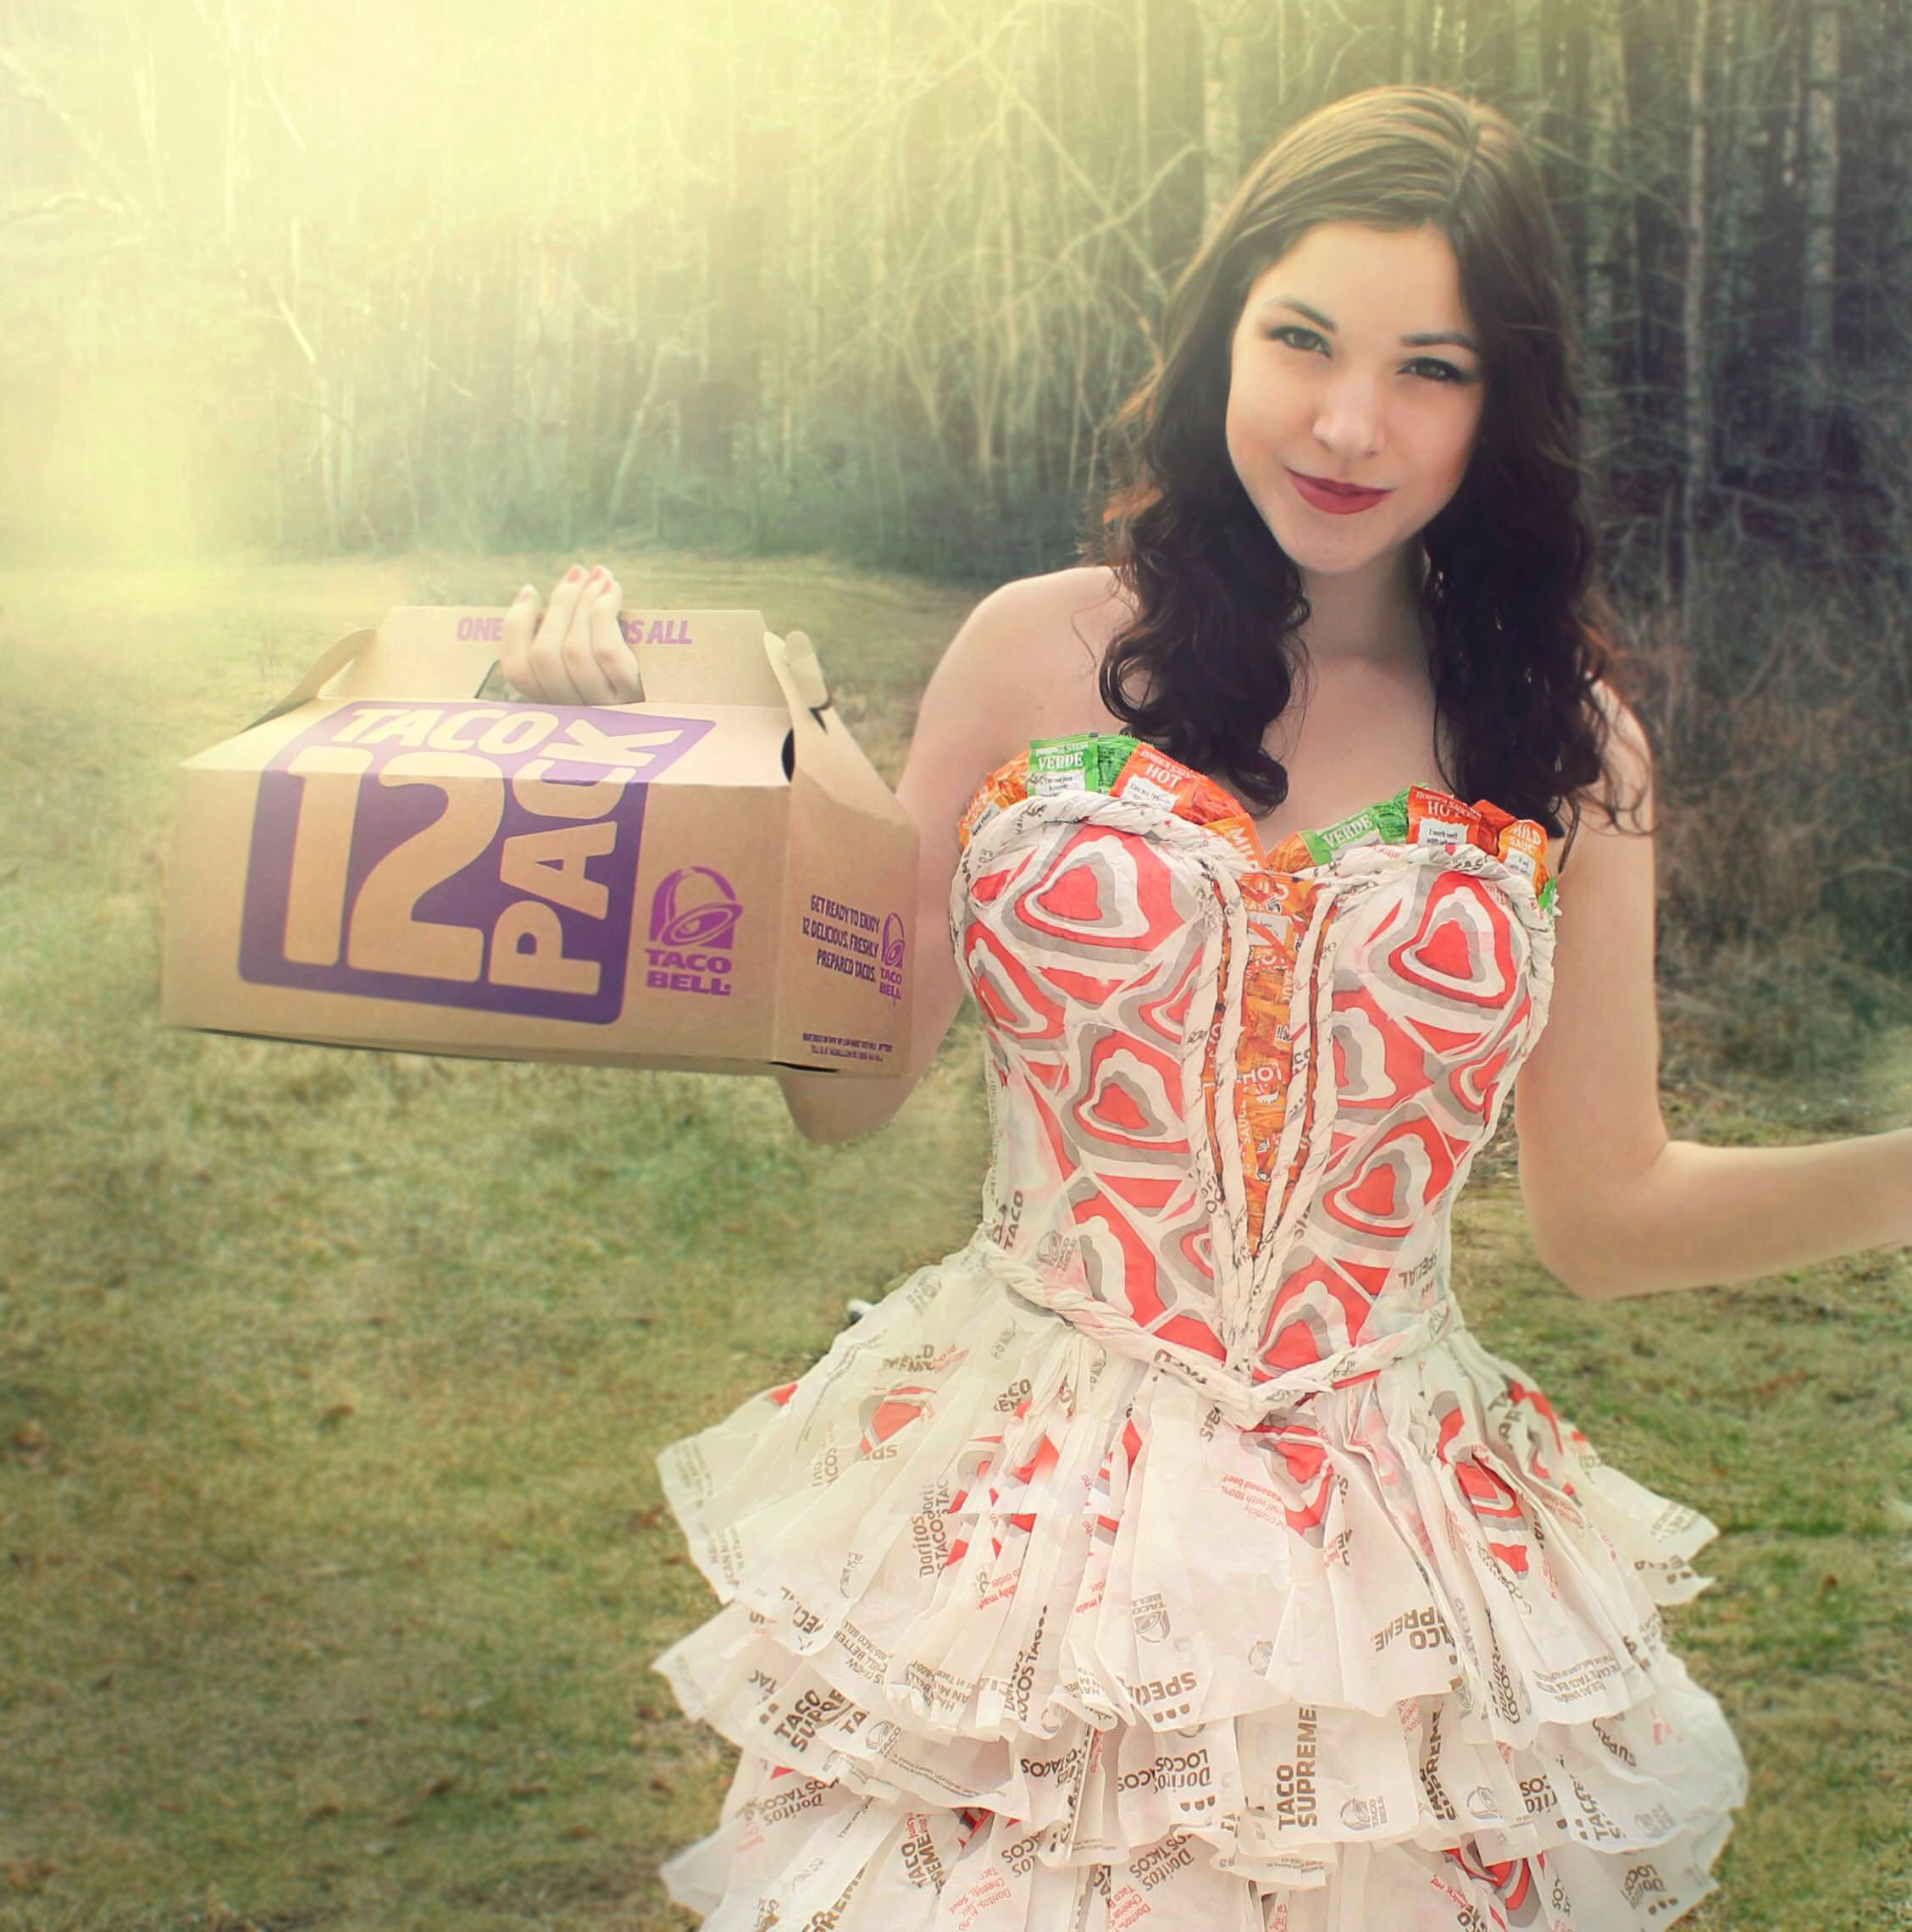 PHOTO: It took Olivia Mears nearly 300 wrappers and 10 hours to design the dress.